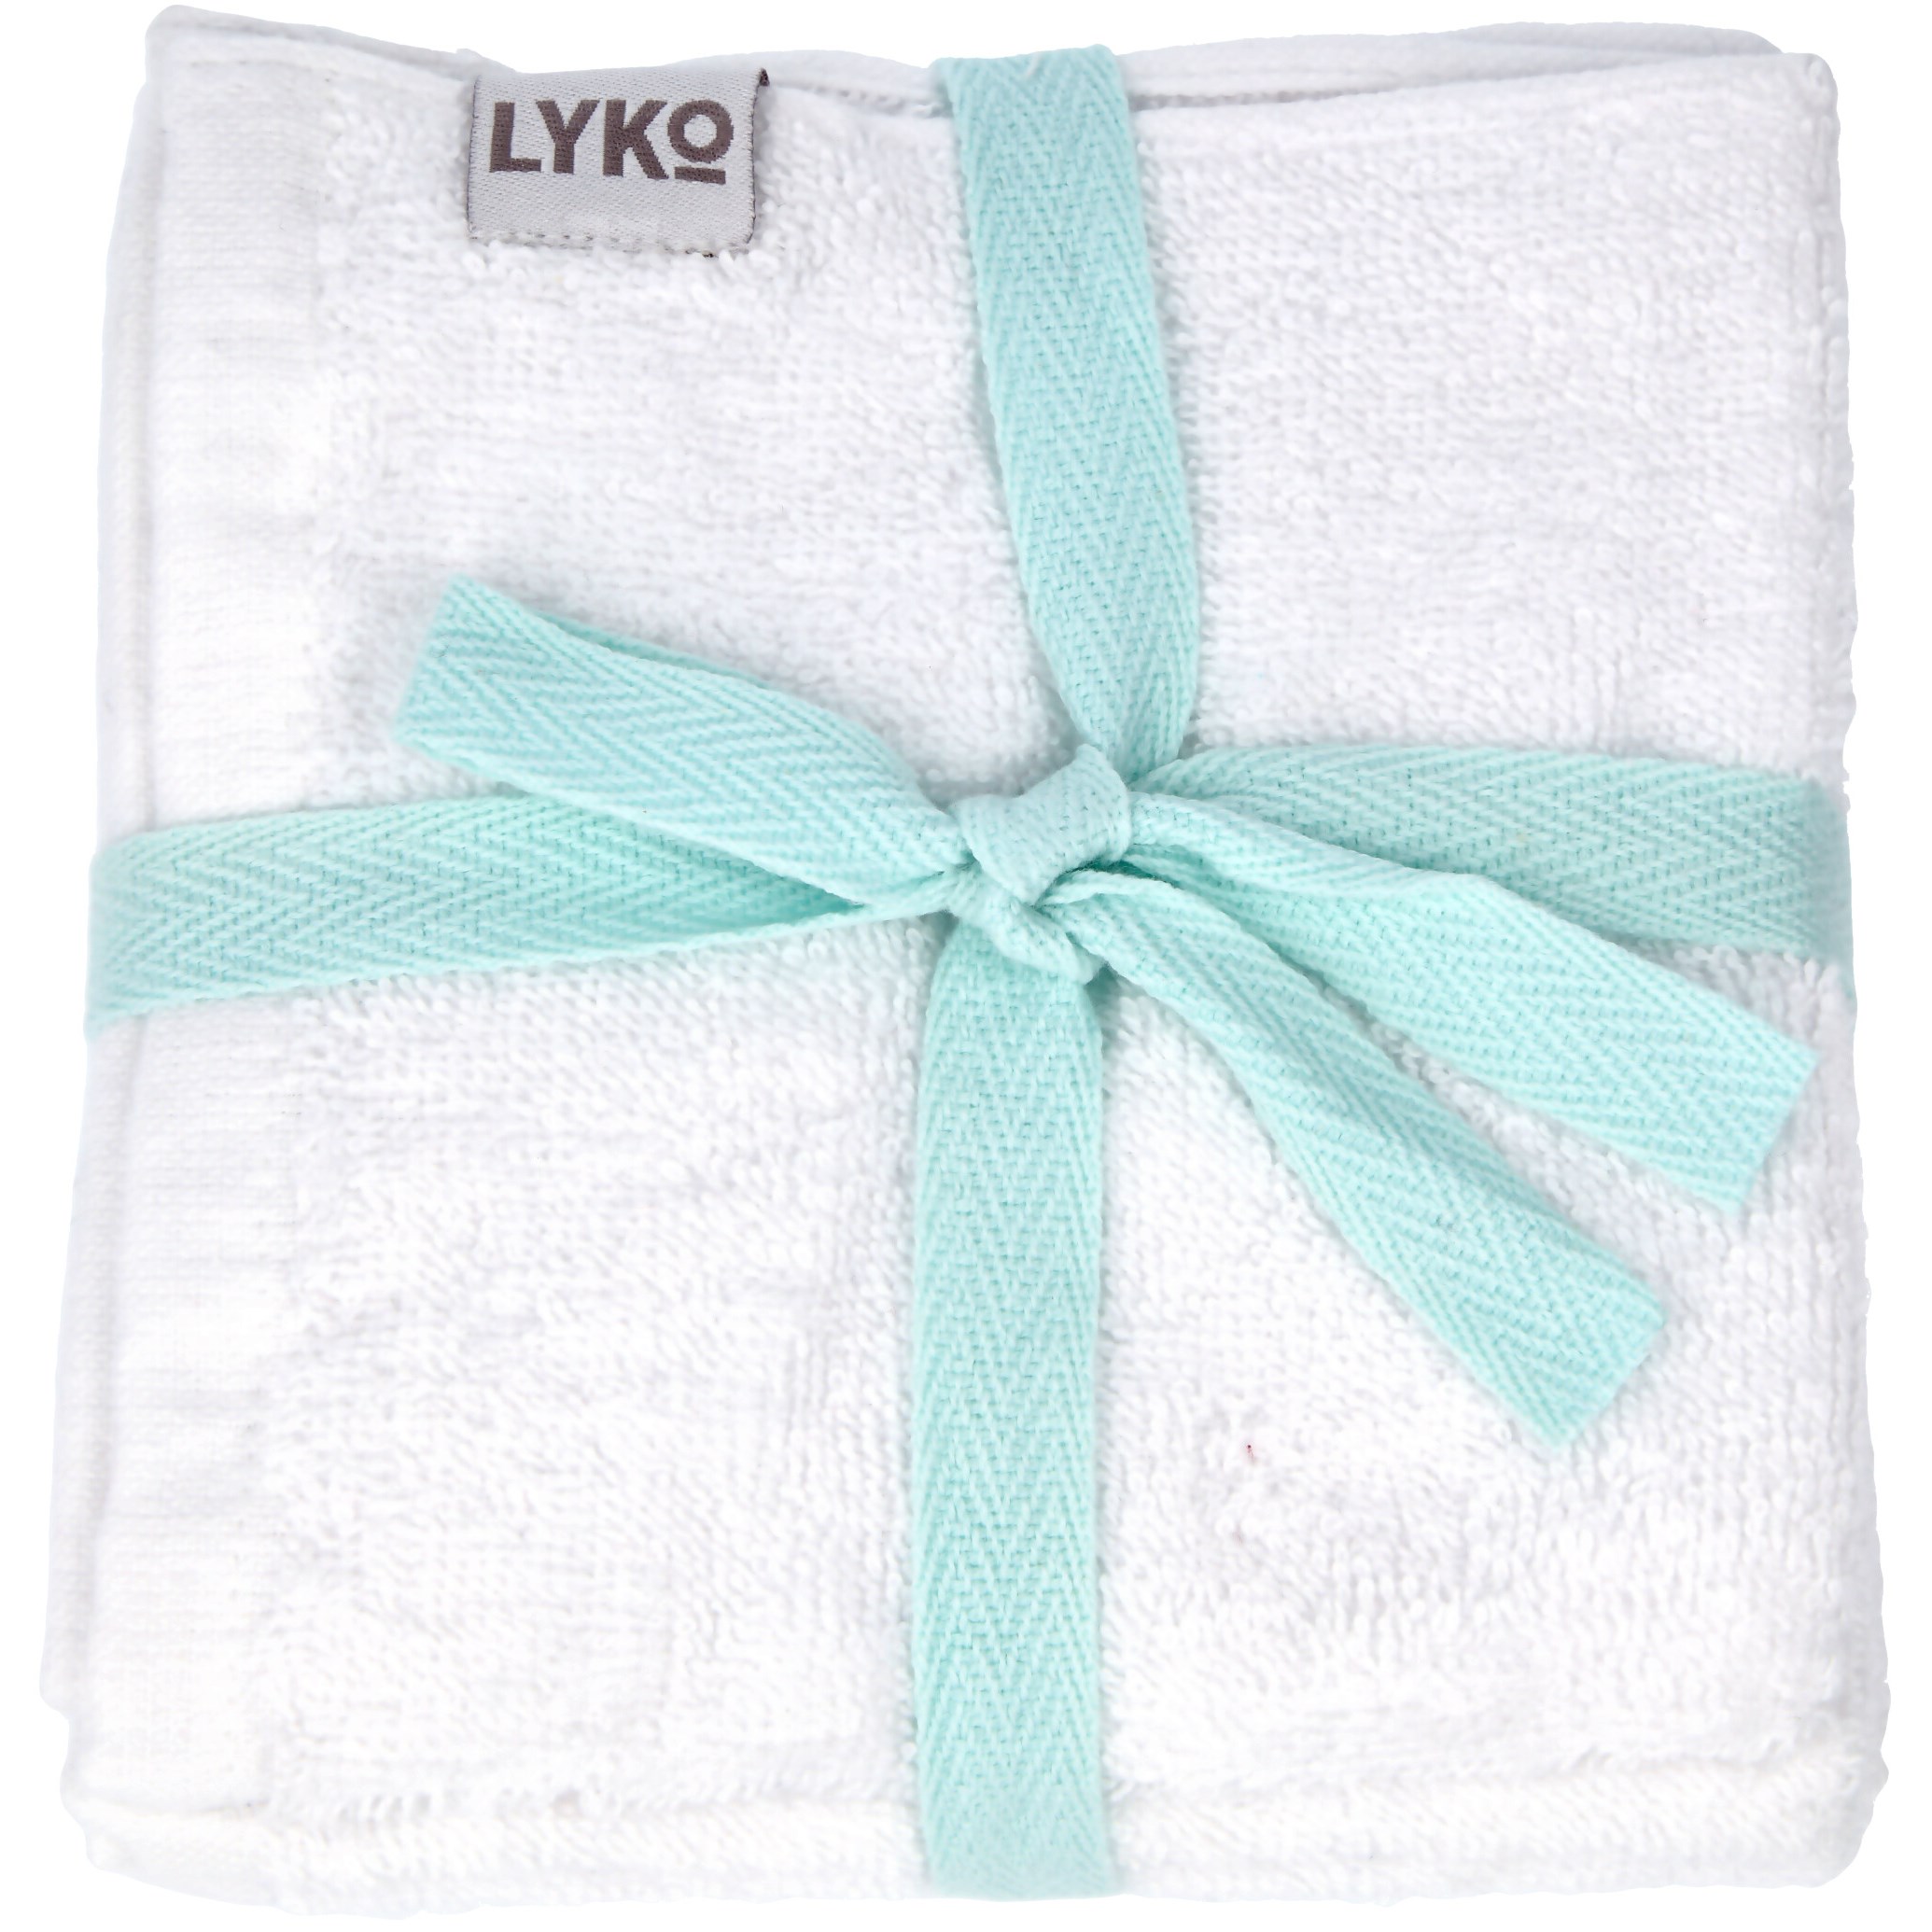 By Lyko Face Towel 4 Pack